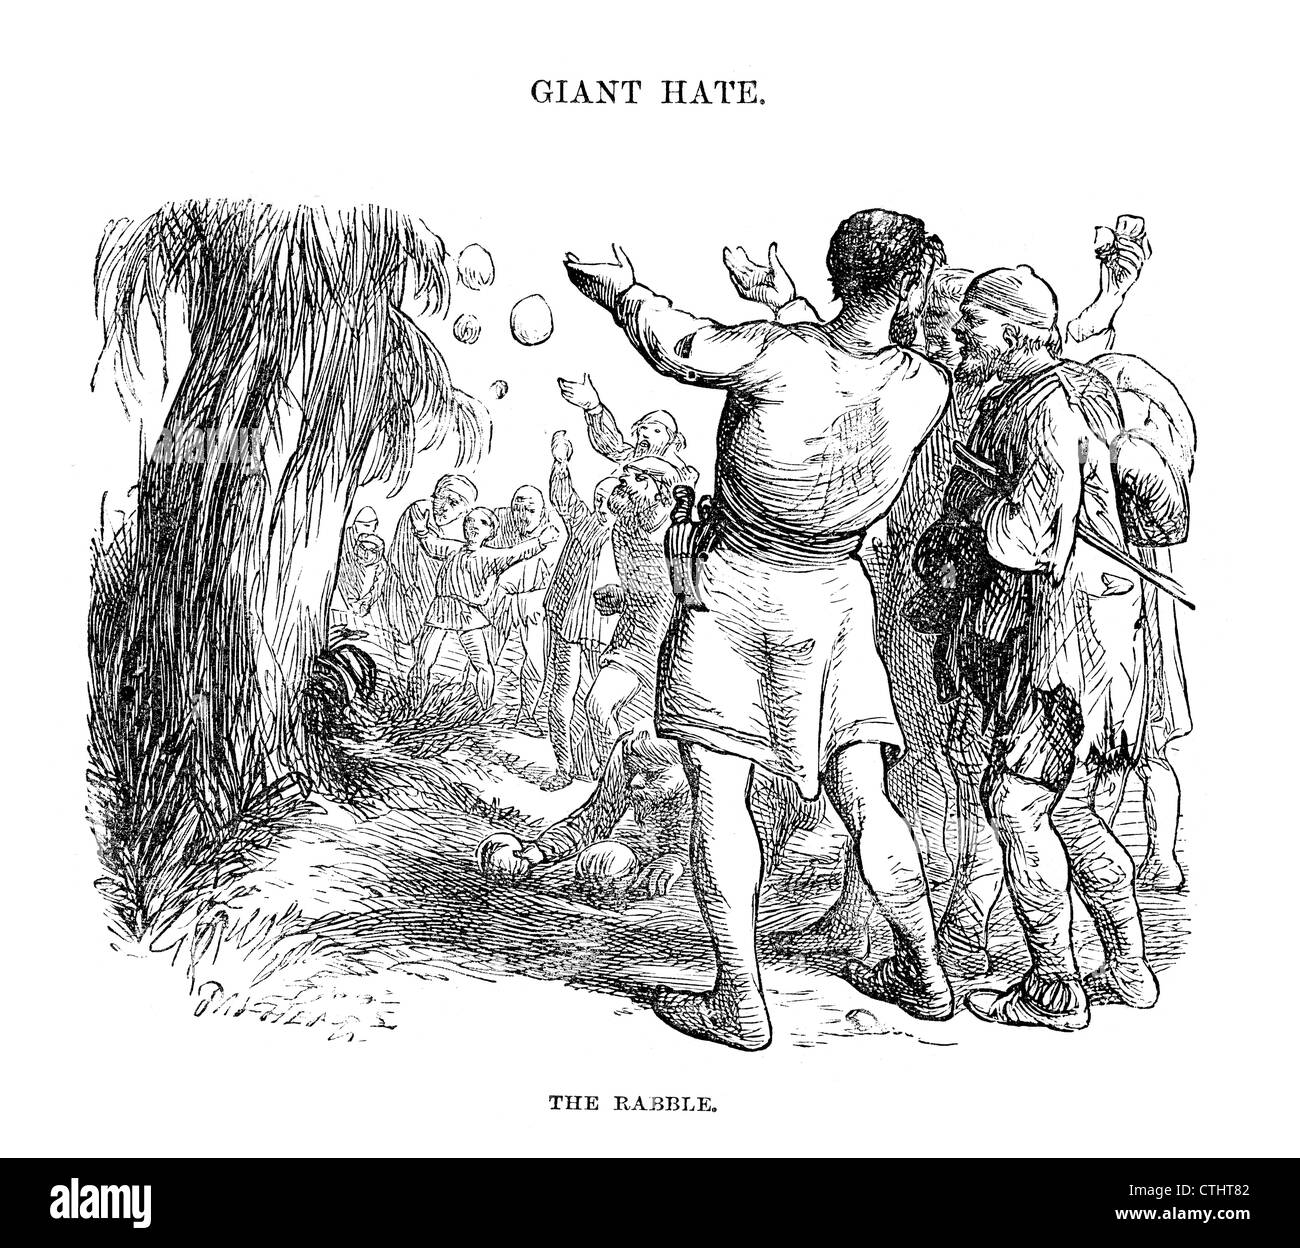 The rabble throwing rocks and stones from the story of the Giant Killer or the Battle which all must fight Stock Photo